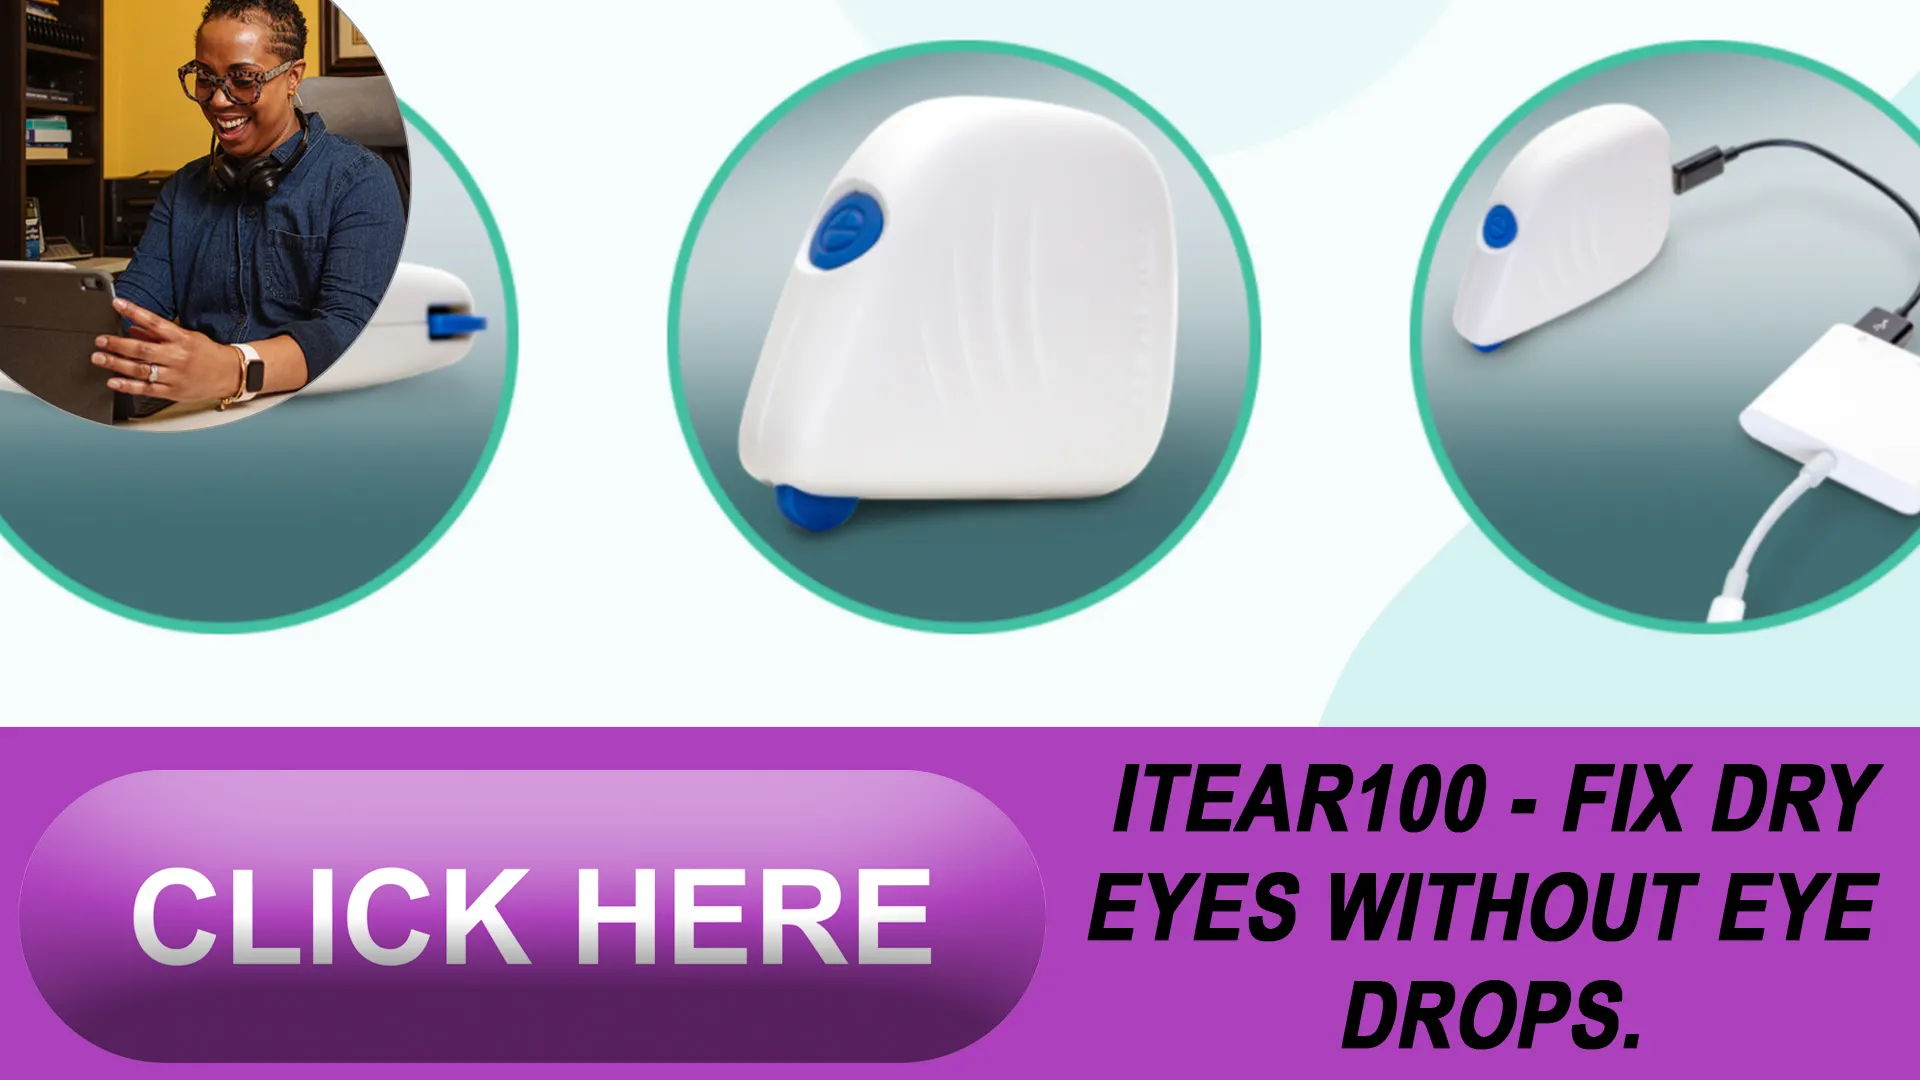 iTEAR100: A Step-by-Step Guide to Getting Yours